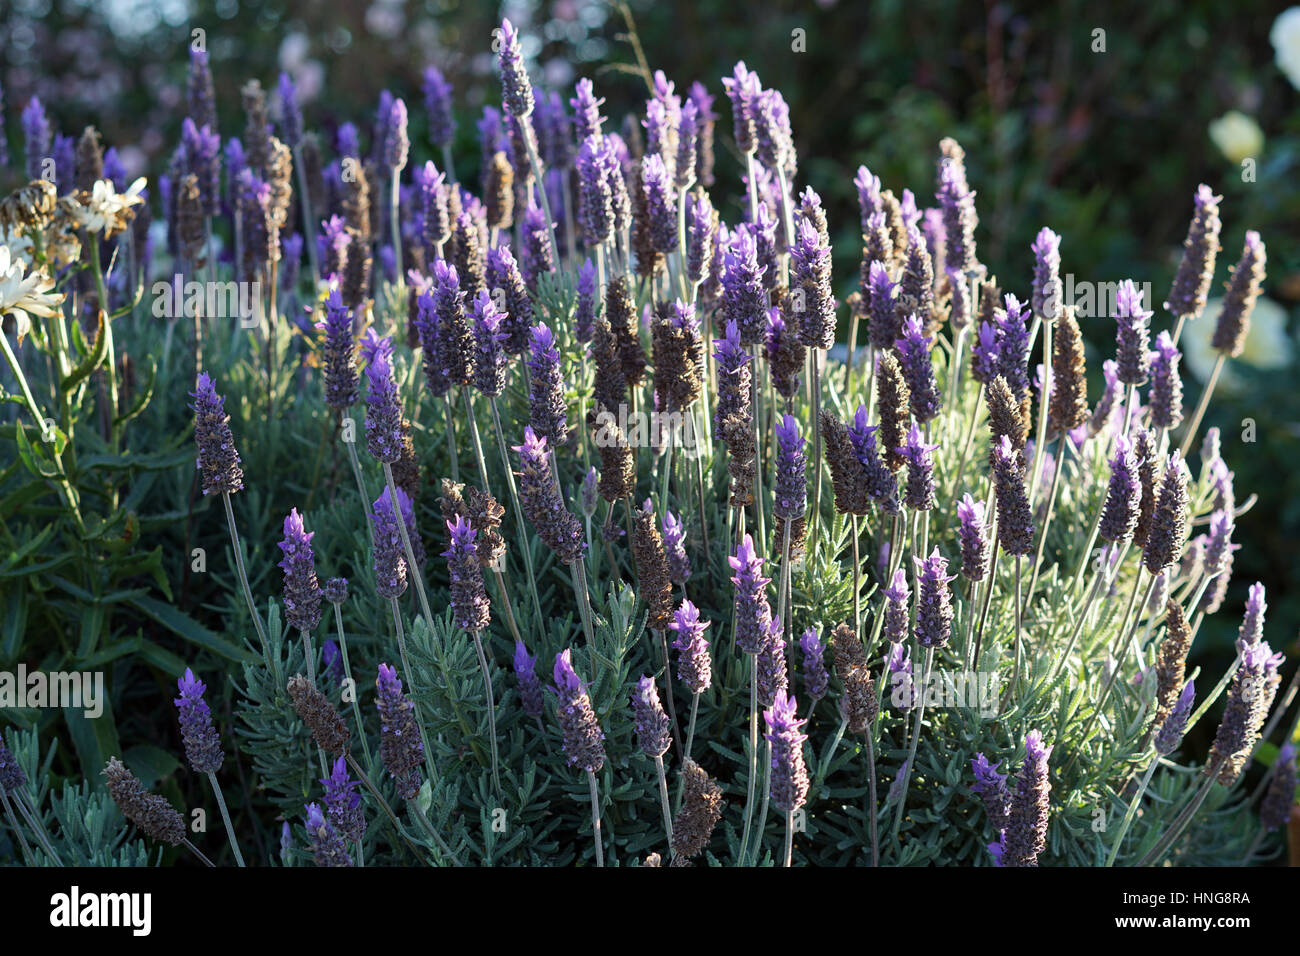 Lavender flowers growing in a garden Stock Photo